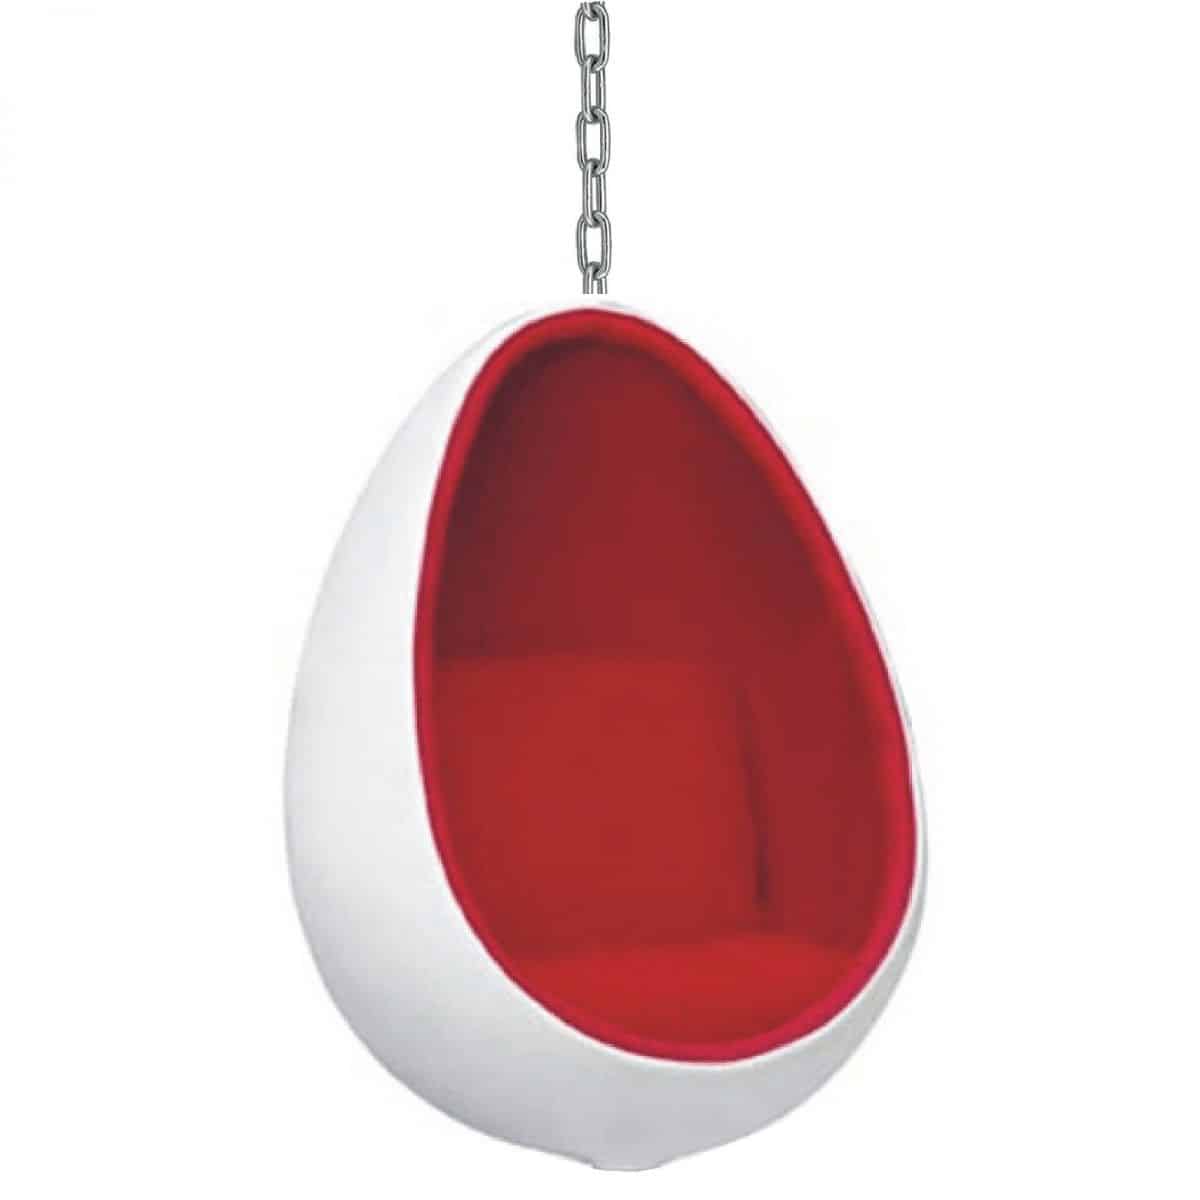 egg chairs for kids